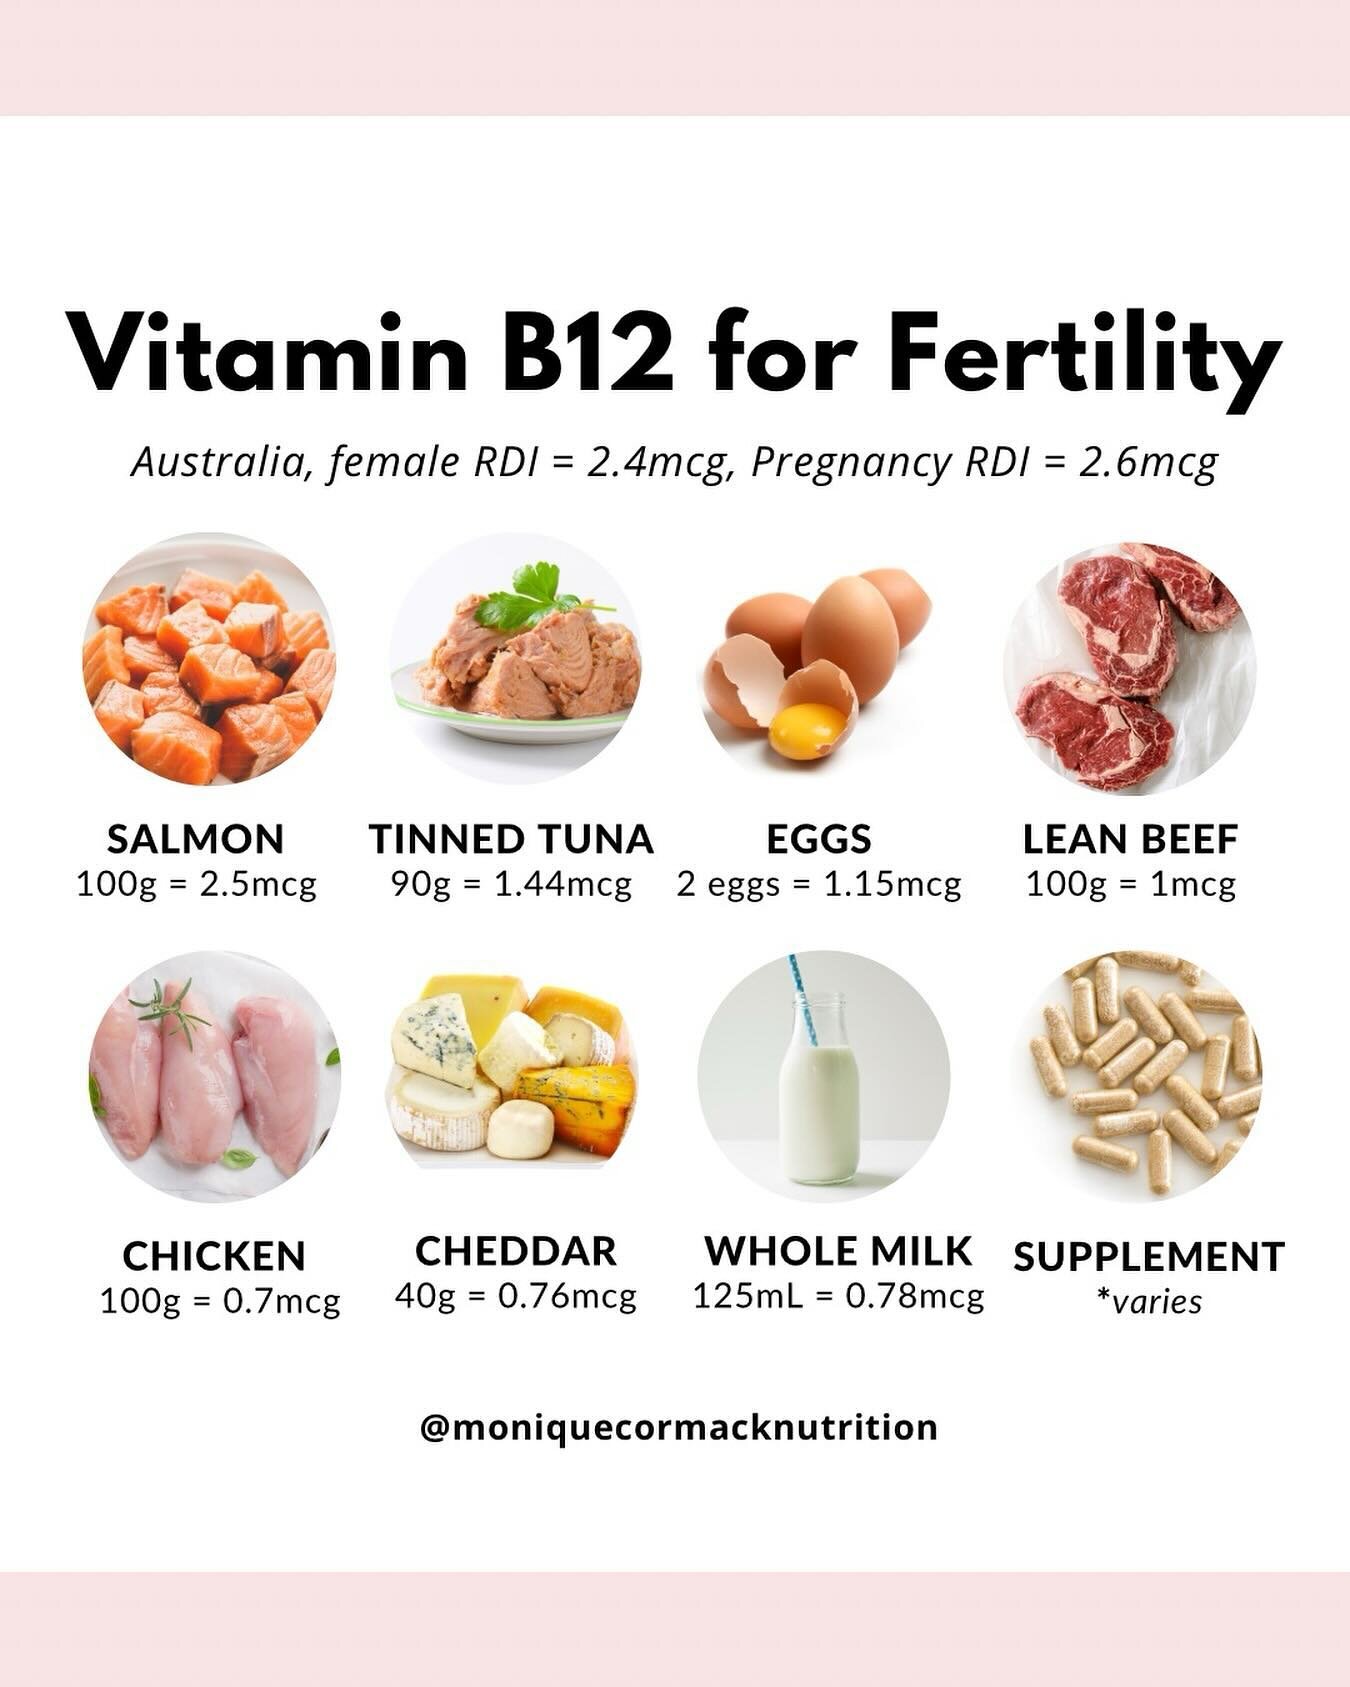 VITAMIN B12 for IVF, FERTILITY &amp; PREGNANCY⁣
⁣
👉 Vitamin B12 is essential for the nervous system, making red blood cells and for DNA synthesis and regulation. ⁣
⁣
If you are planning a pregnancy, get your B12 levels checked by blood test. ⁣
⁣
- V